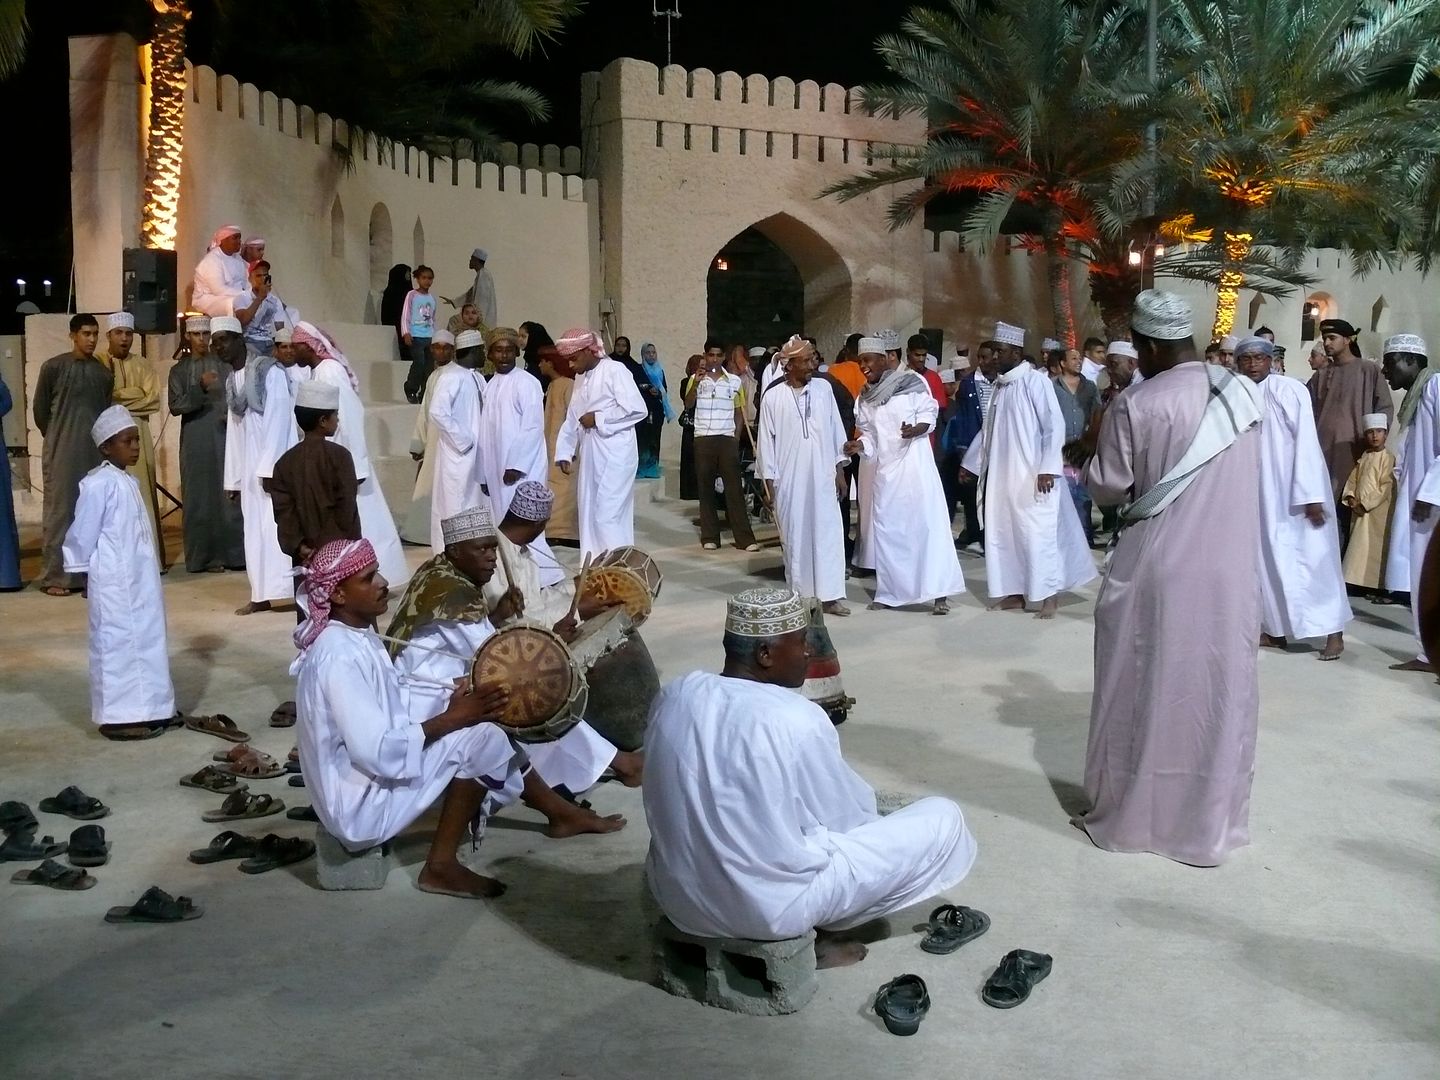 2012.02.21, Traditional singing and dancing (Muscat, Oman)